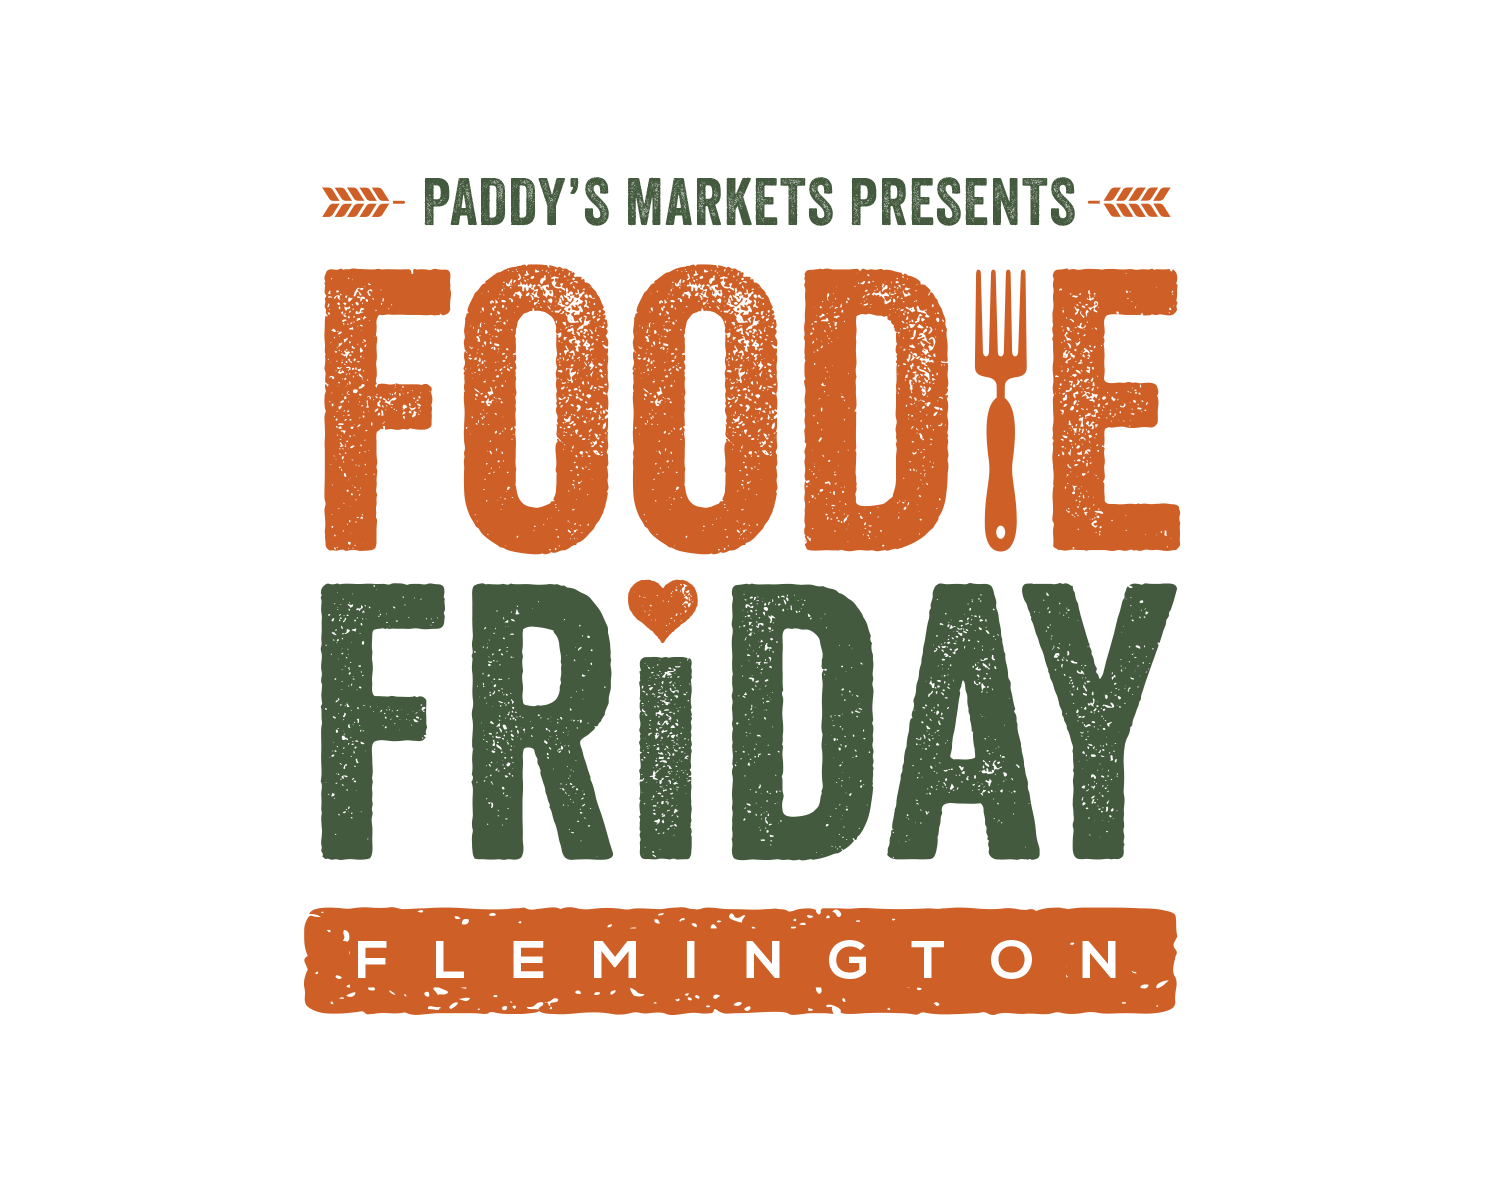 Sell Your General Goods Mid-Week by Tapping the Foot Traffic at Paddy's Foodie Friday